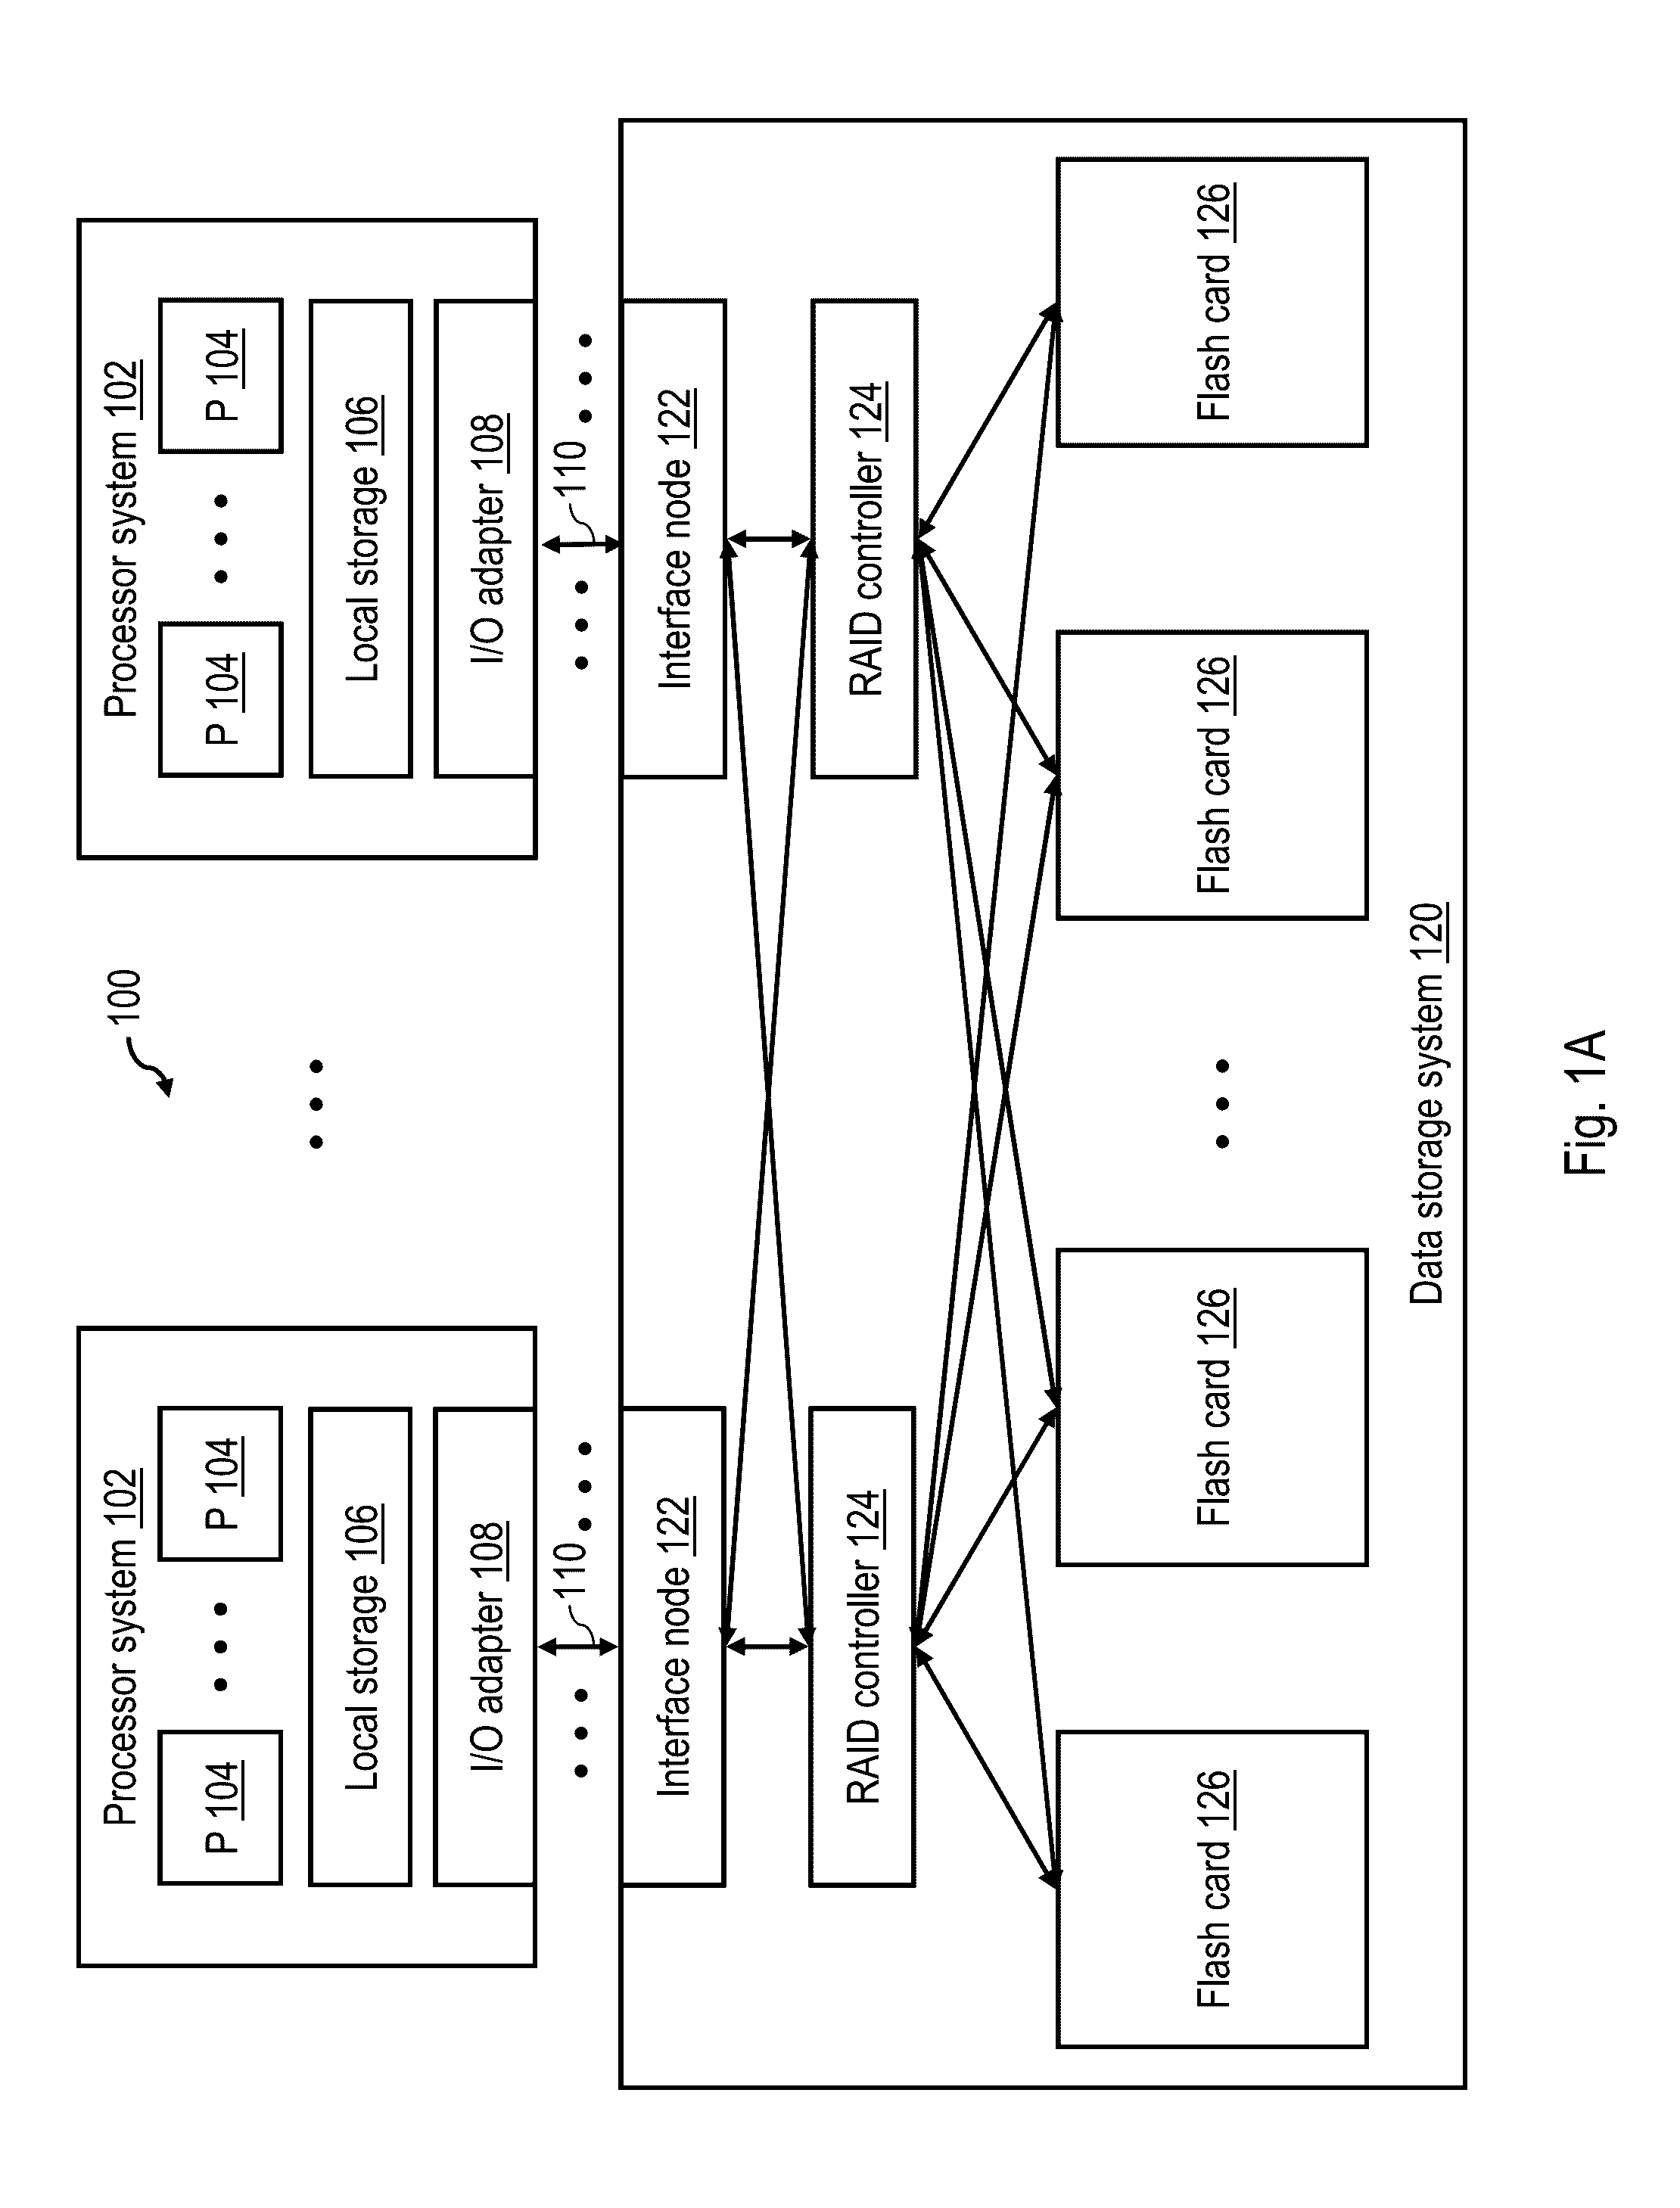 Recovery of multi-page failures in non-volatile memory system